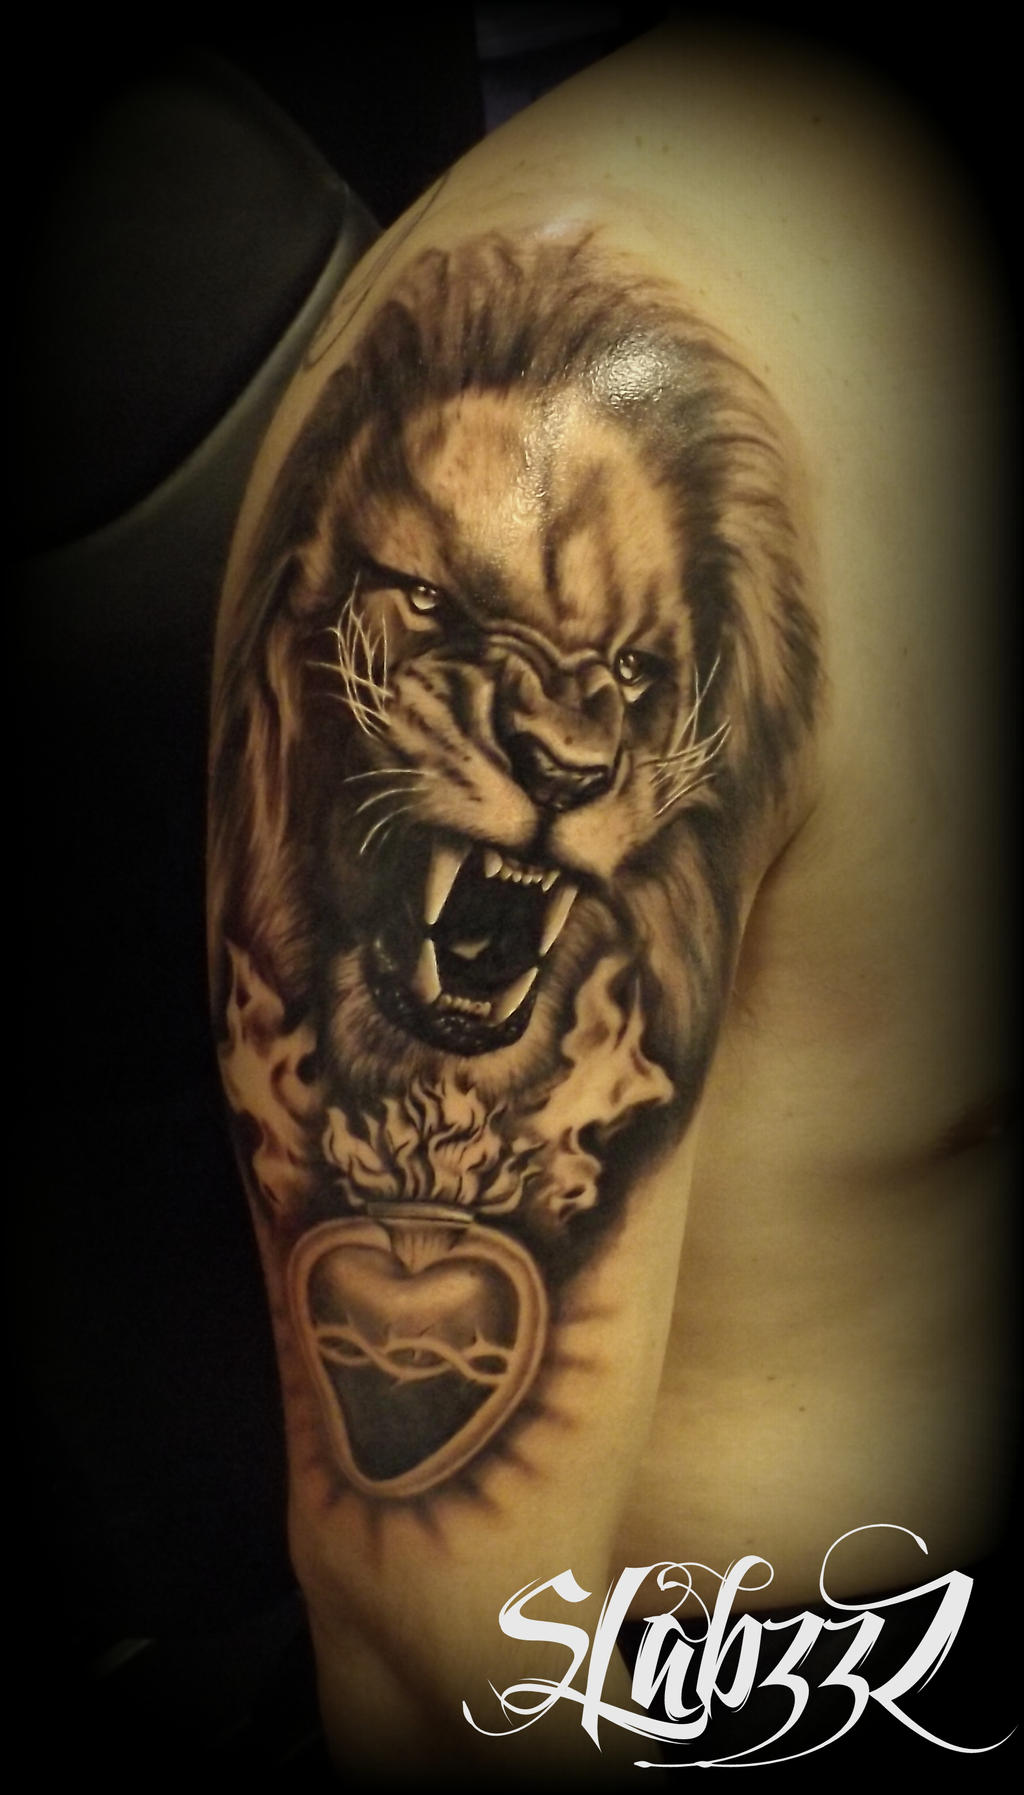 Lion portrait tattoo realistic by CalebSlabzzzGraham on DeviantArt